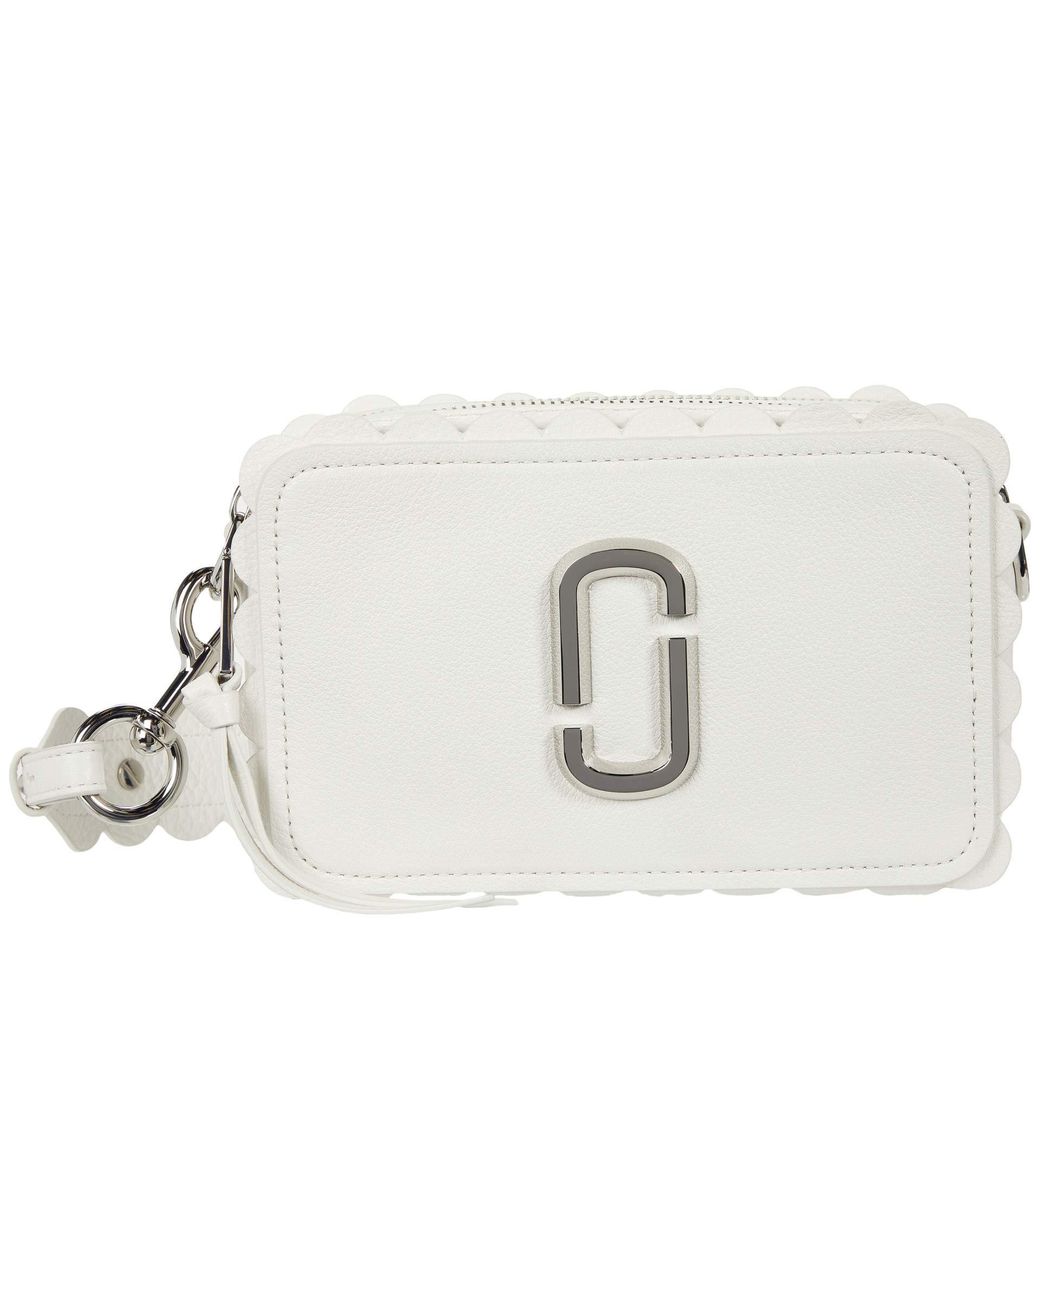 Marc Jacobs Softshot 21 Scallop Leather Cross-body Bag in White | Lyst